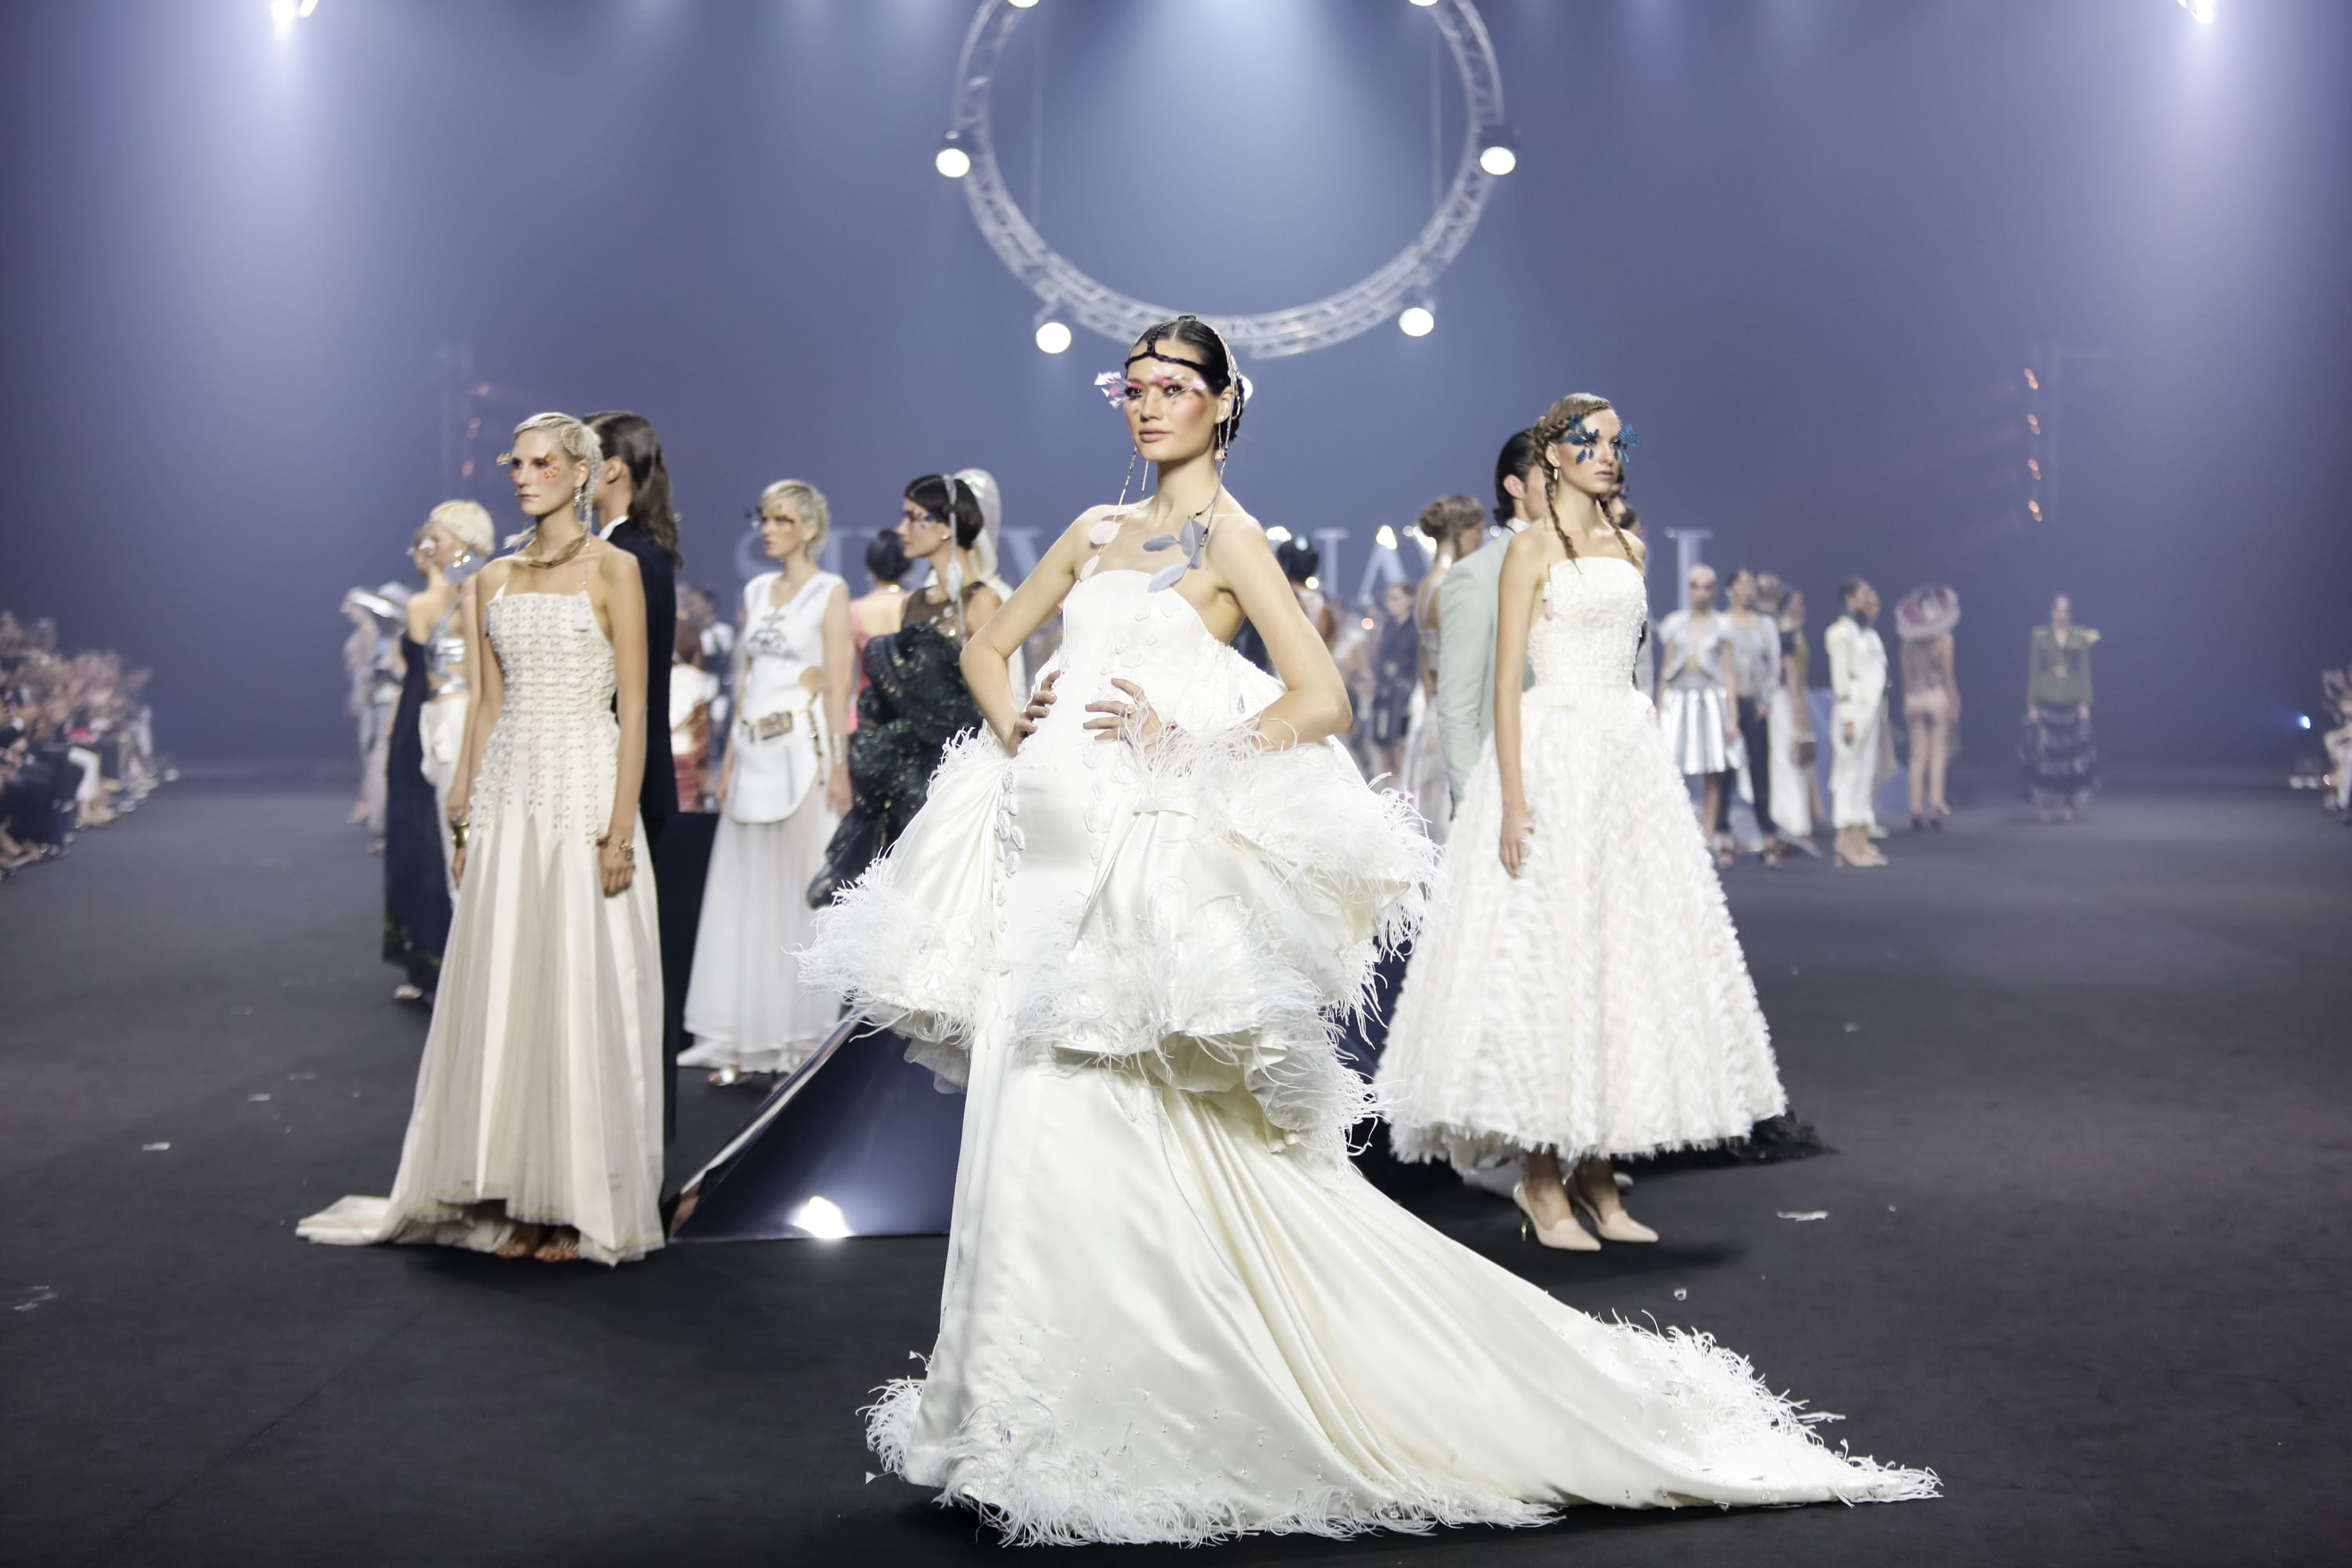 Out of this world: SIRIVANNAVARI’s fashion show is a galactic beauty